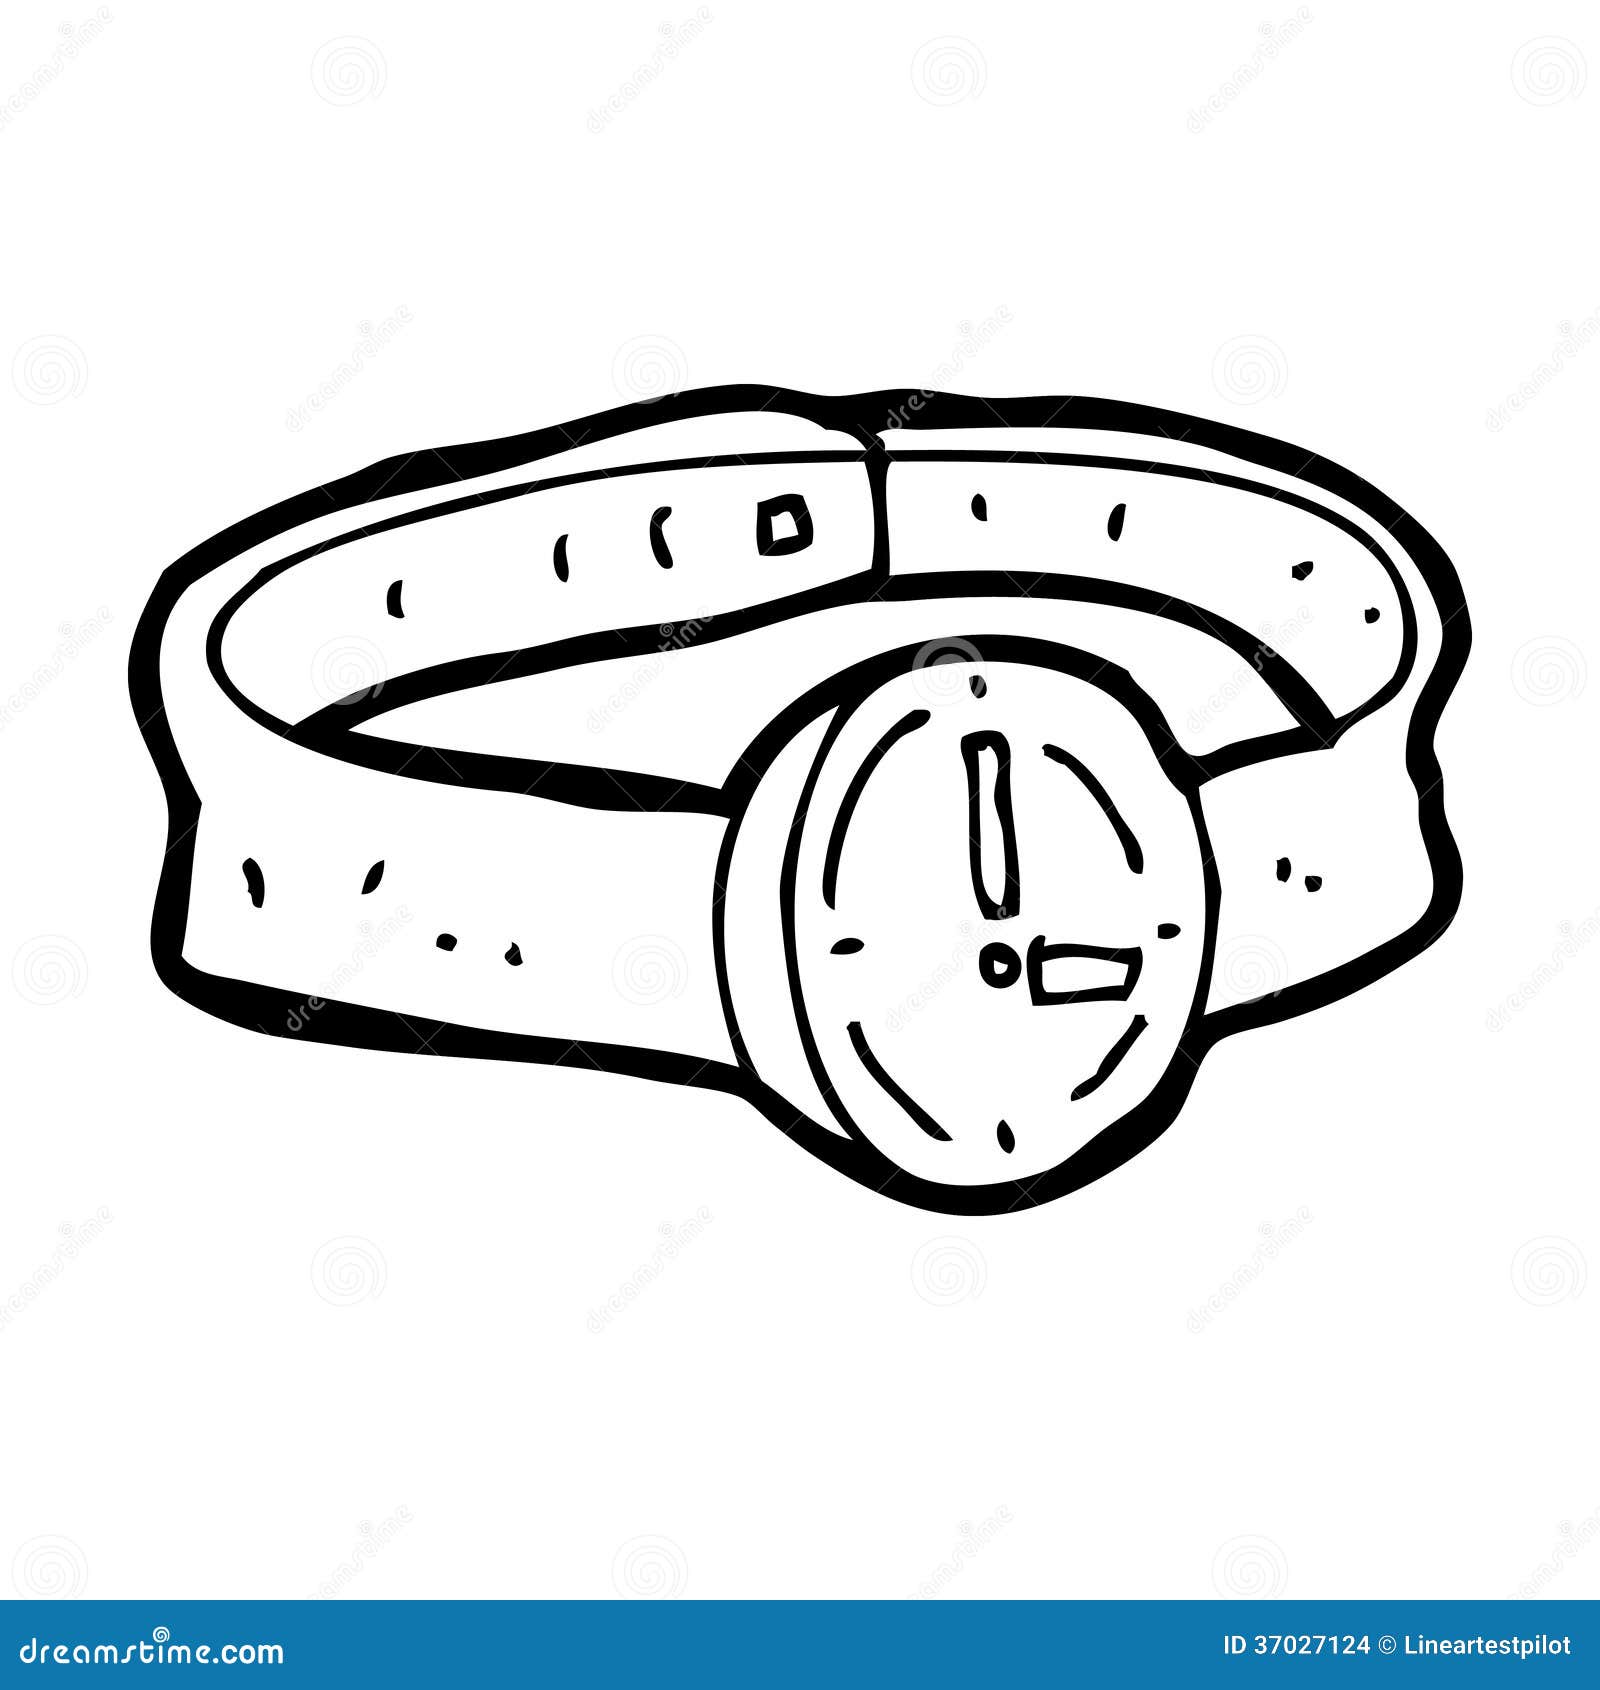 watch clipart black and white - photo #18